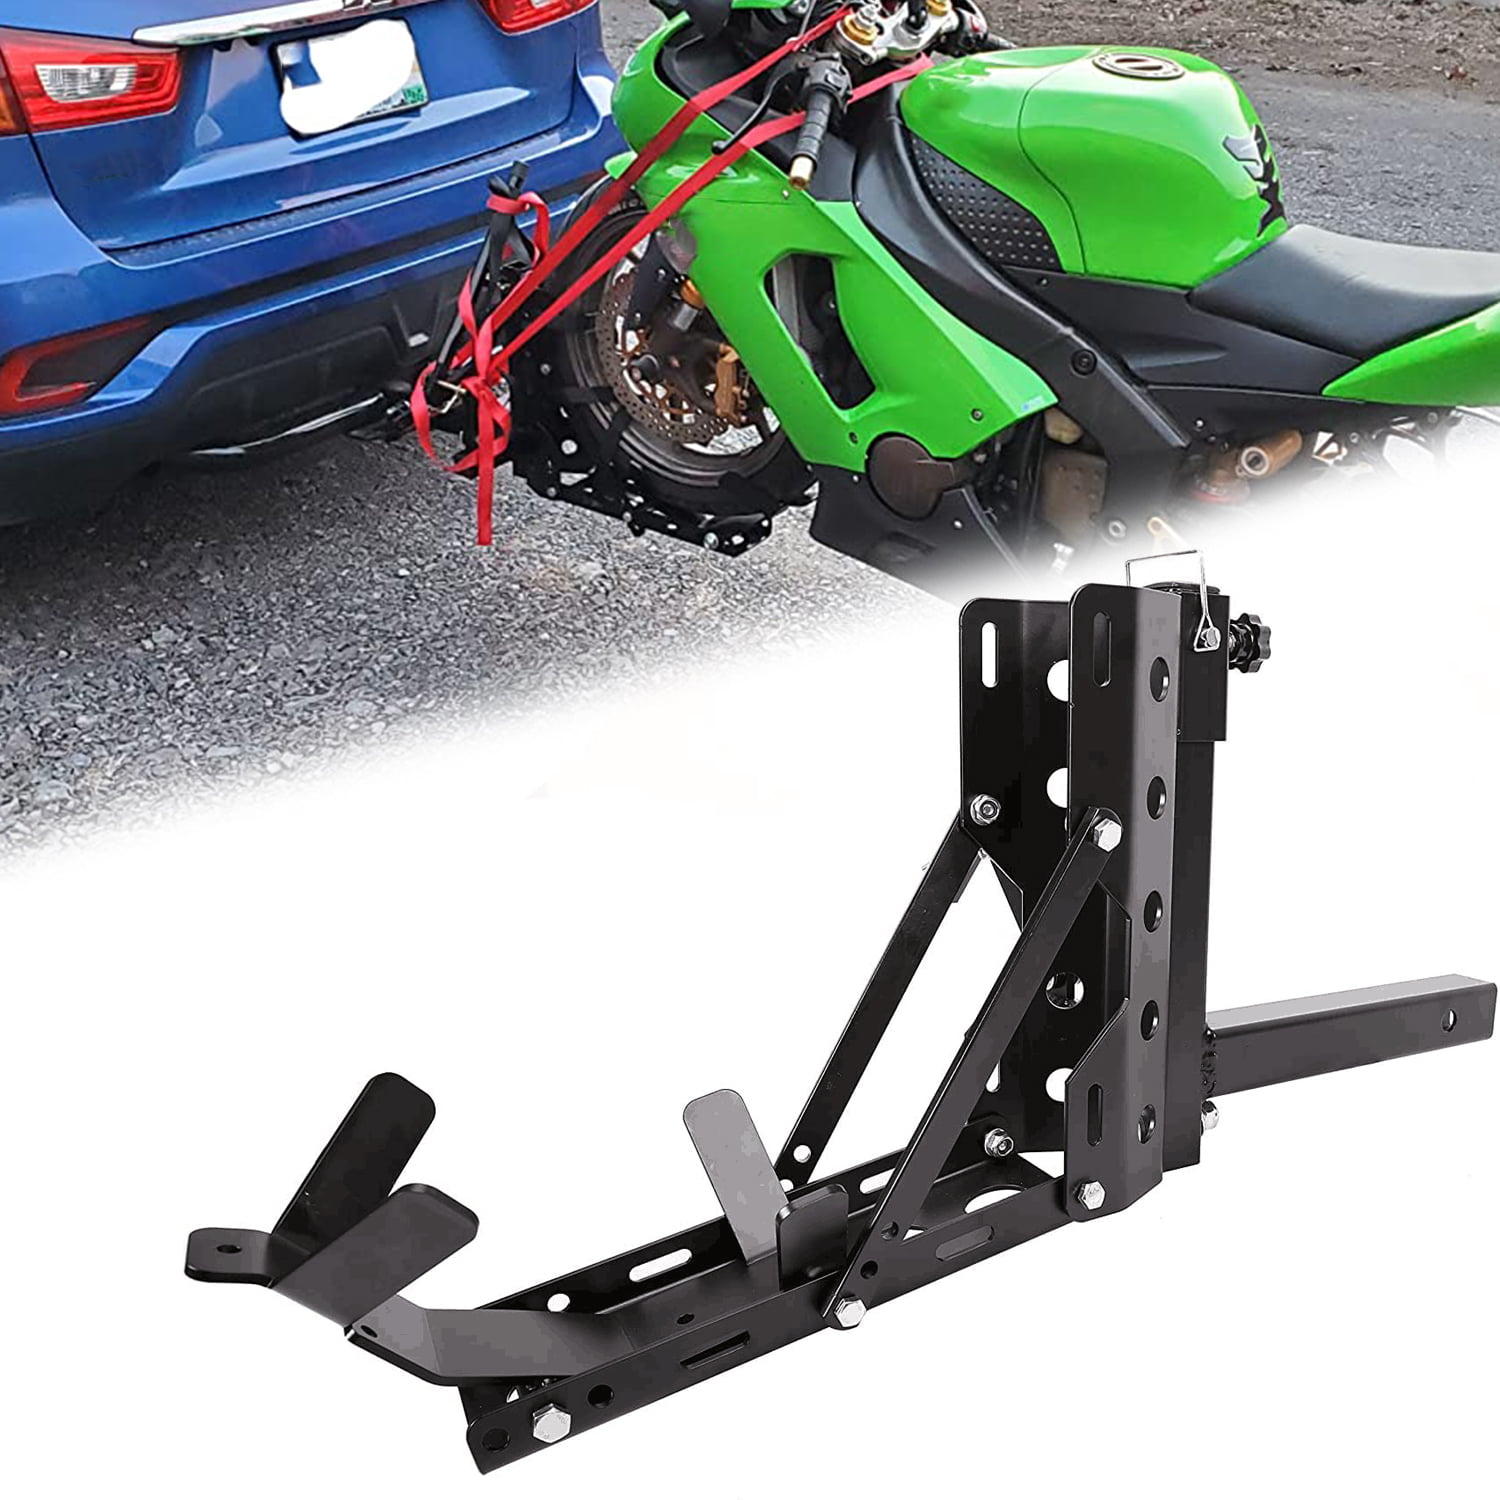 byqs us Motorcycle Trailer bracketMotorcycle Scooter Carrier Up to 800lb Trailer Hauler Hitch Mount Rack Ramp Anti 